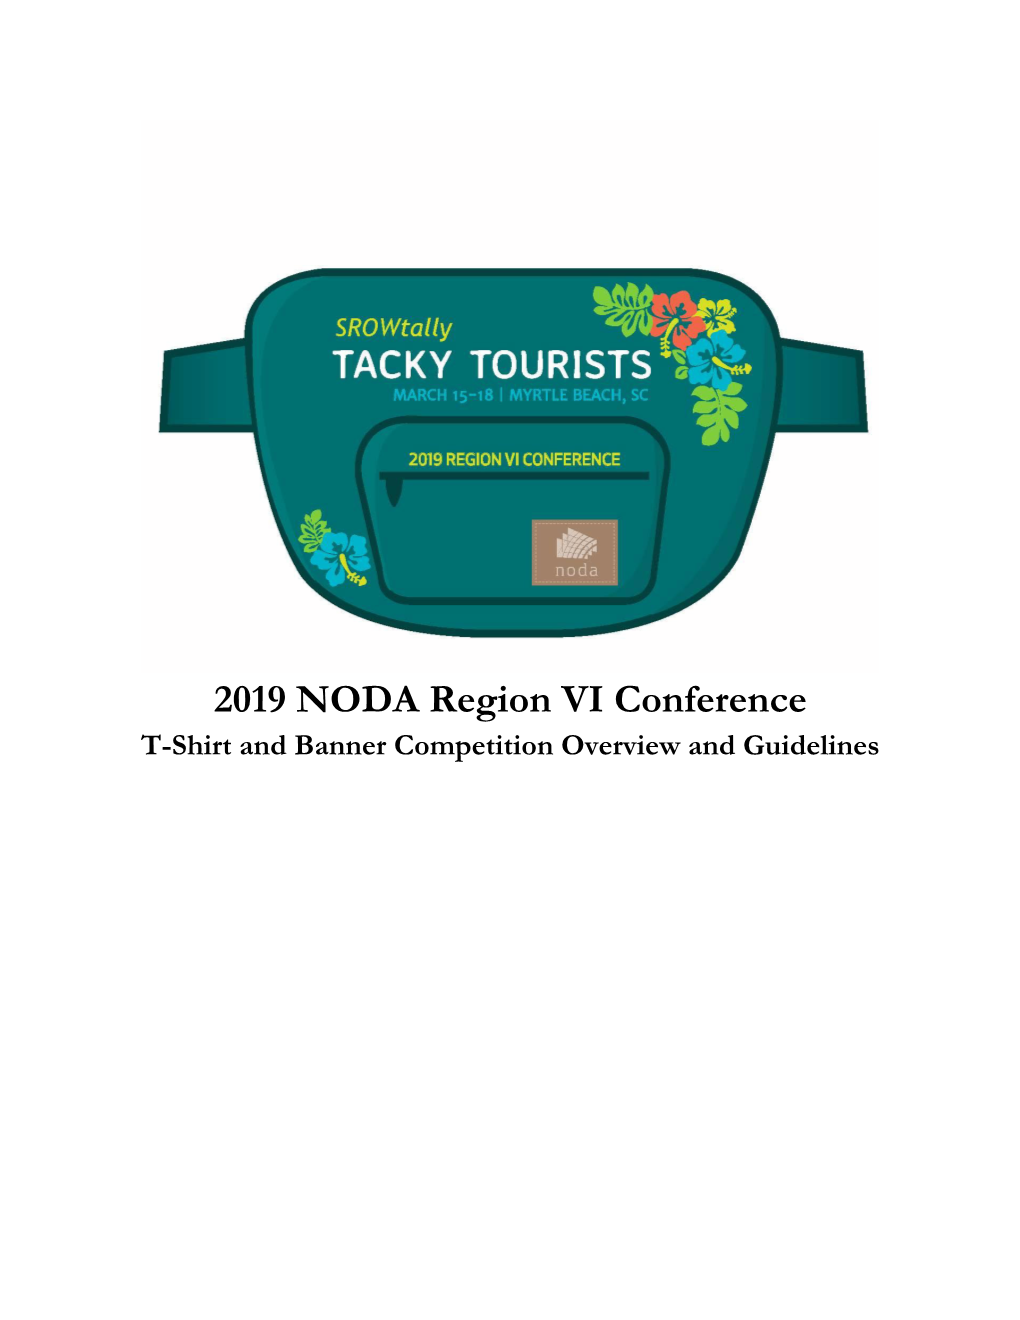 2019 NODA Region VI Conference T-Shirt and Banner Competition Overview and Guidelines